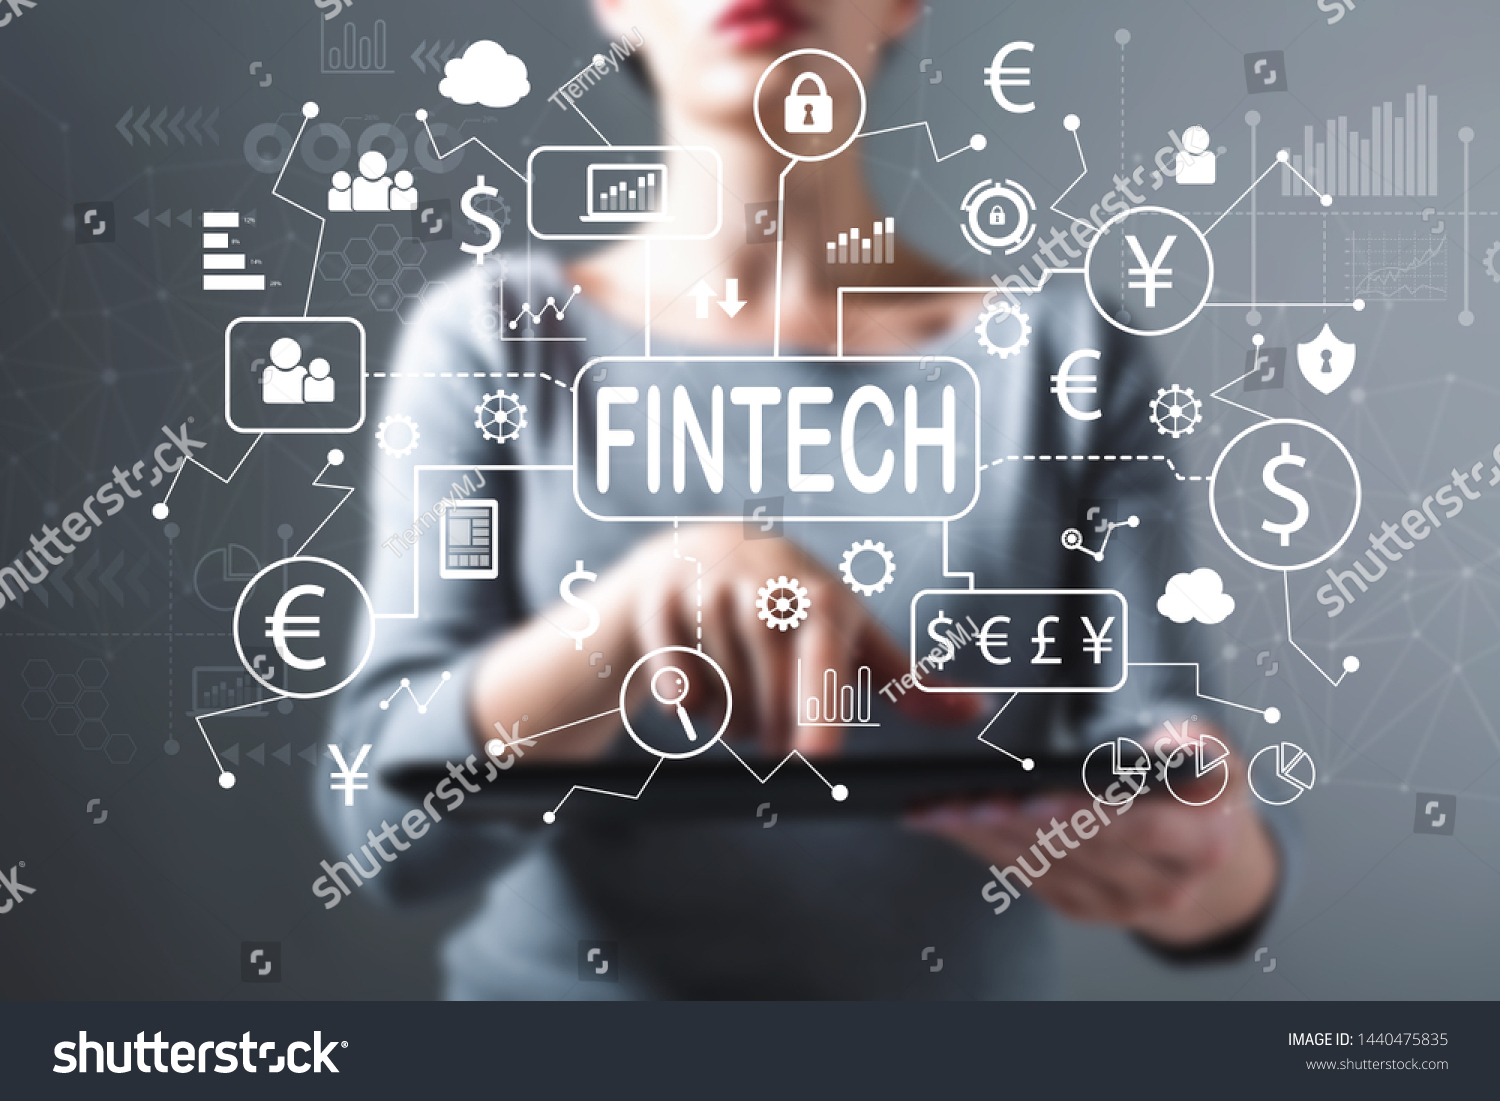 Fintech theme with business woman using a tablet computer #1440475835